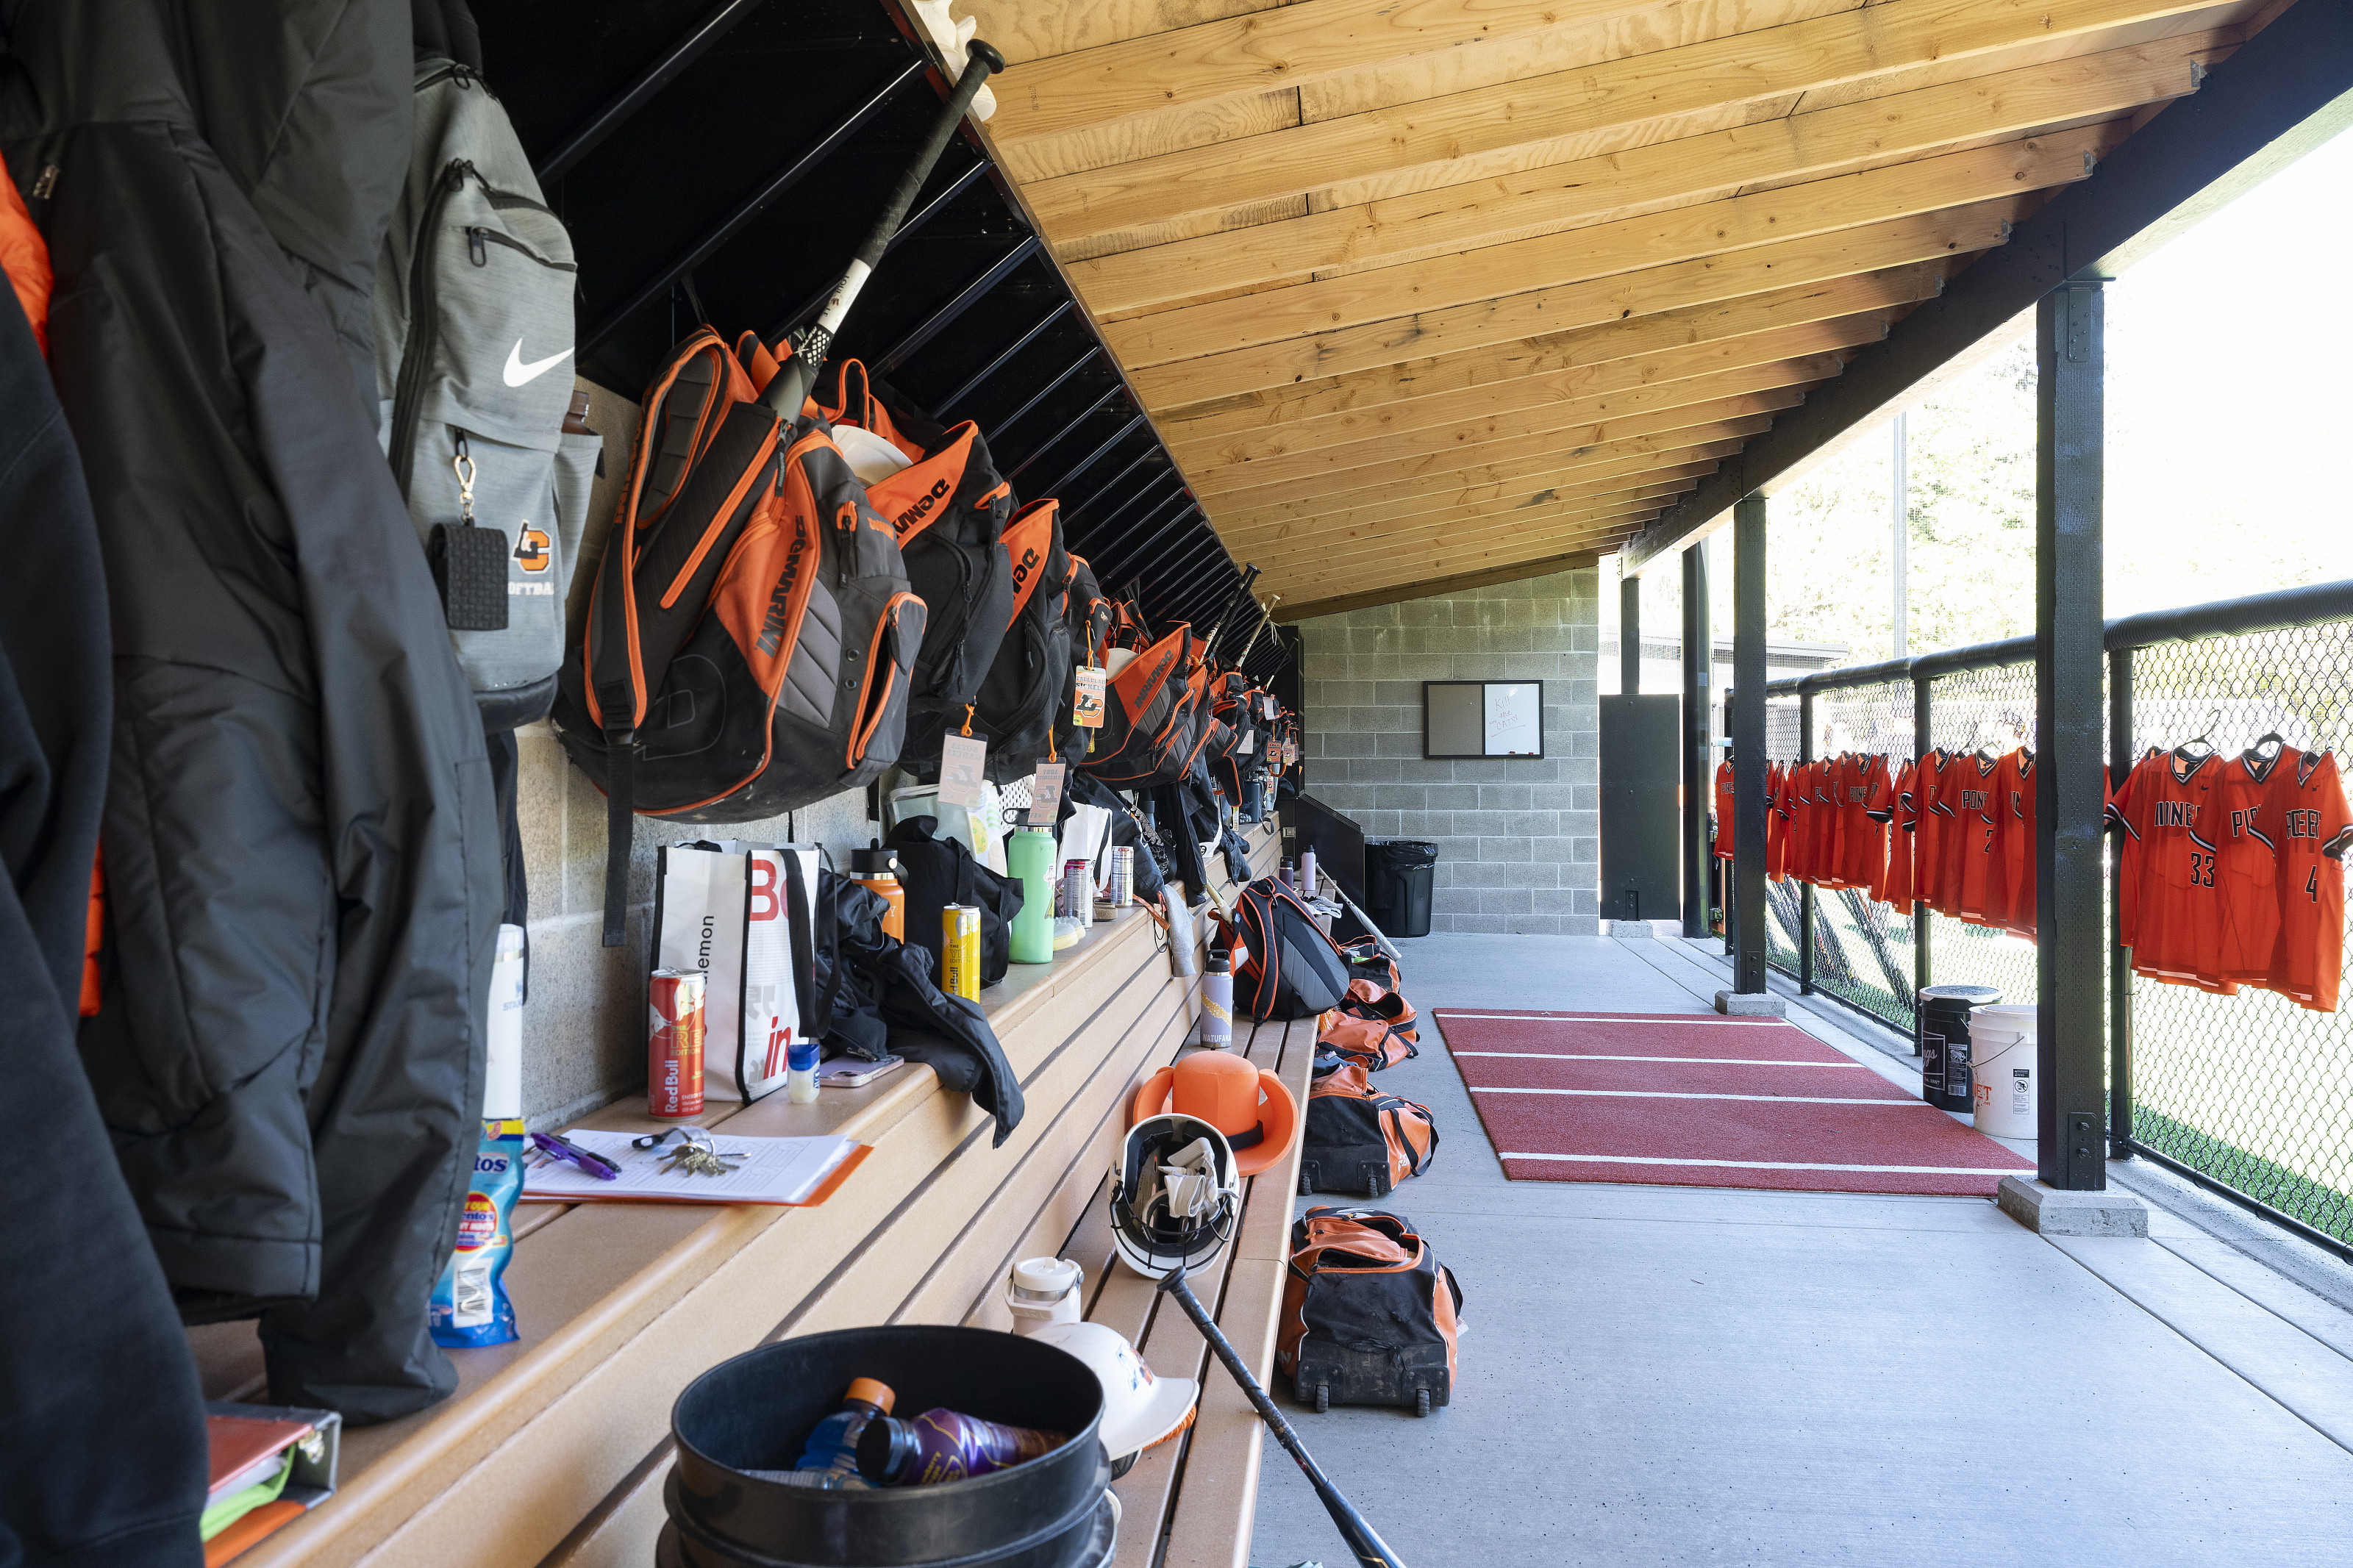 Backpacks hanging on a wall above a long wooden bench inside a softball dugout.